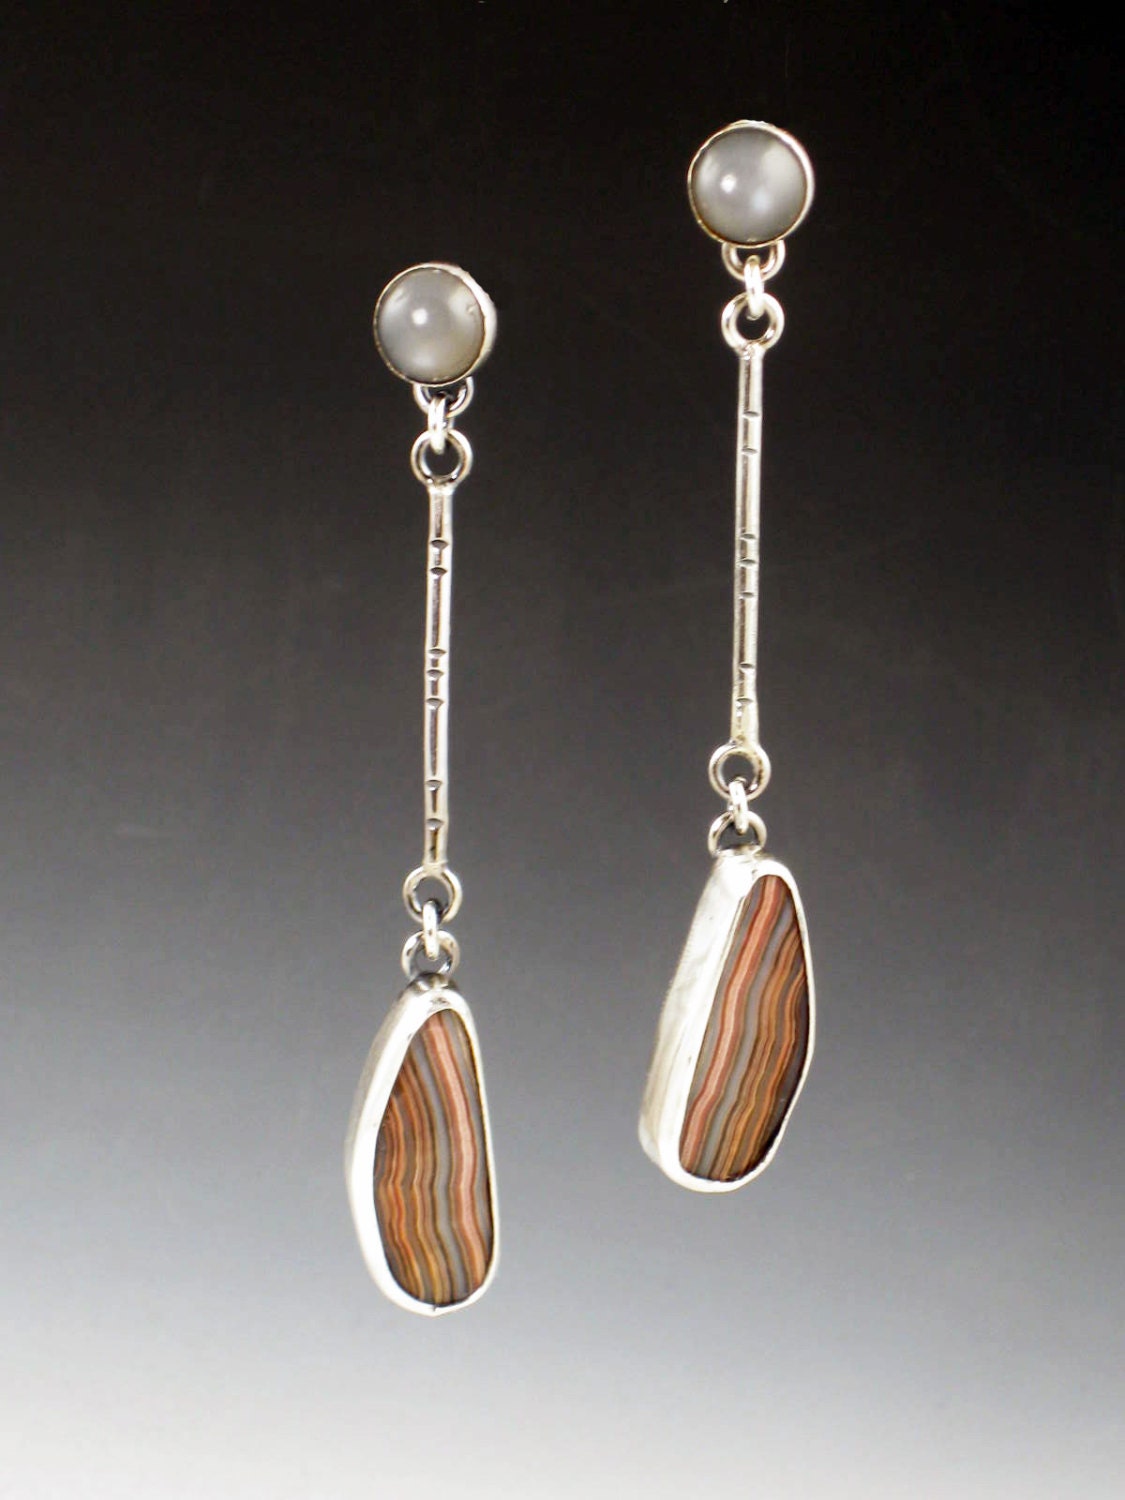 Crazy Lace Agate Earrings sterling silver by MicheleGradyDesigns